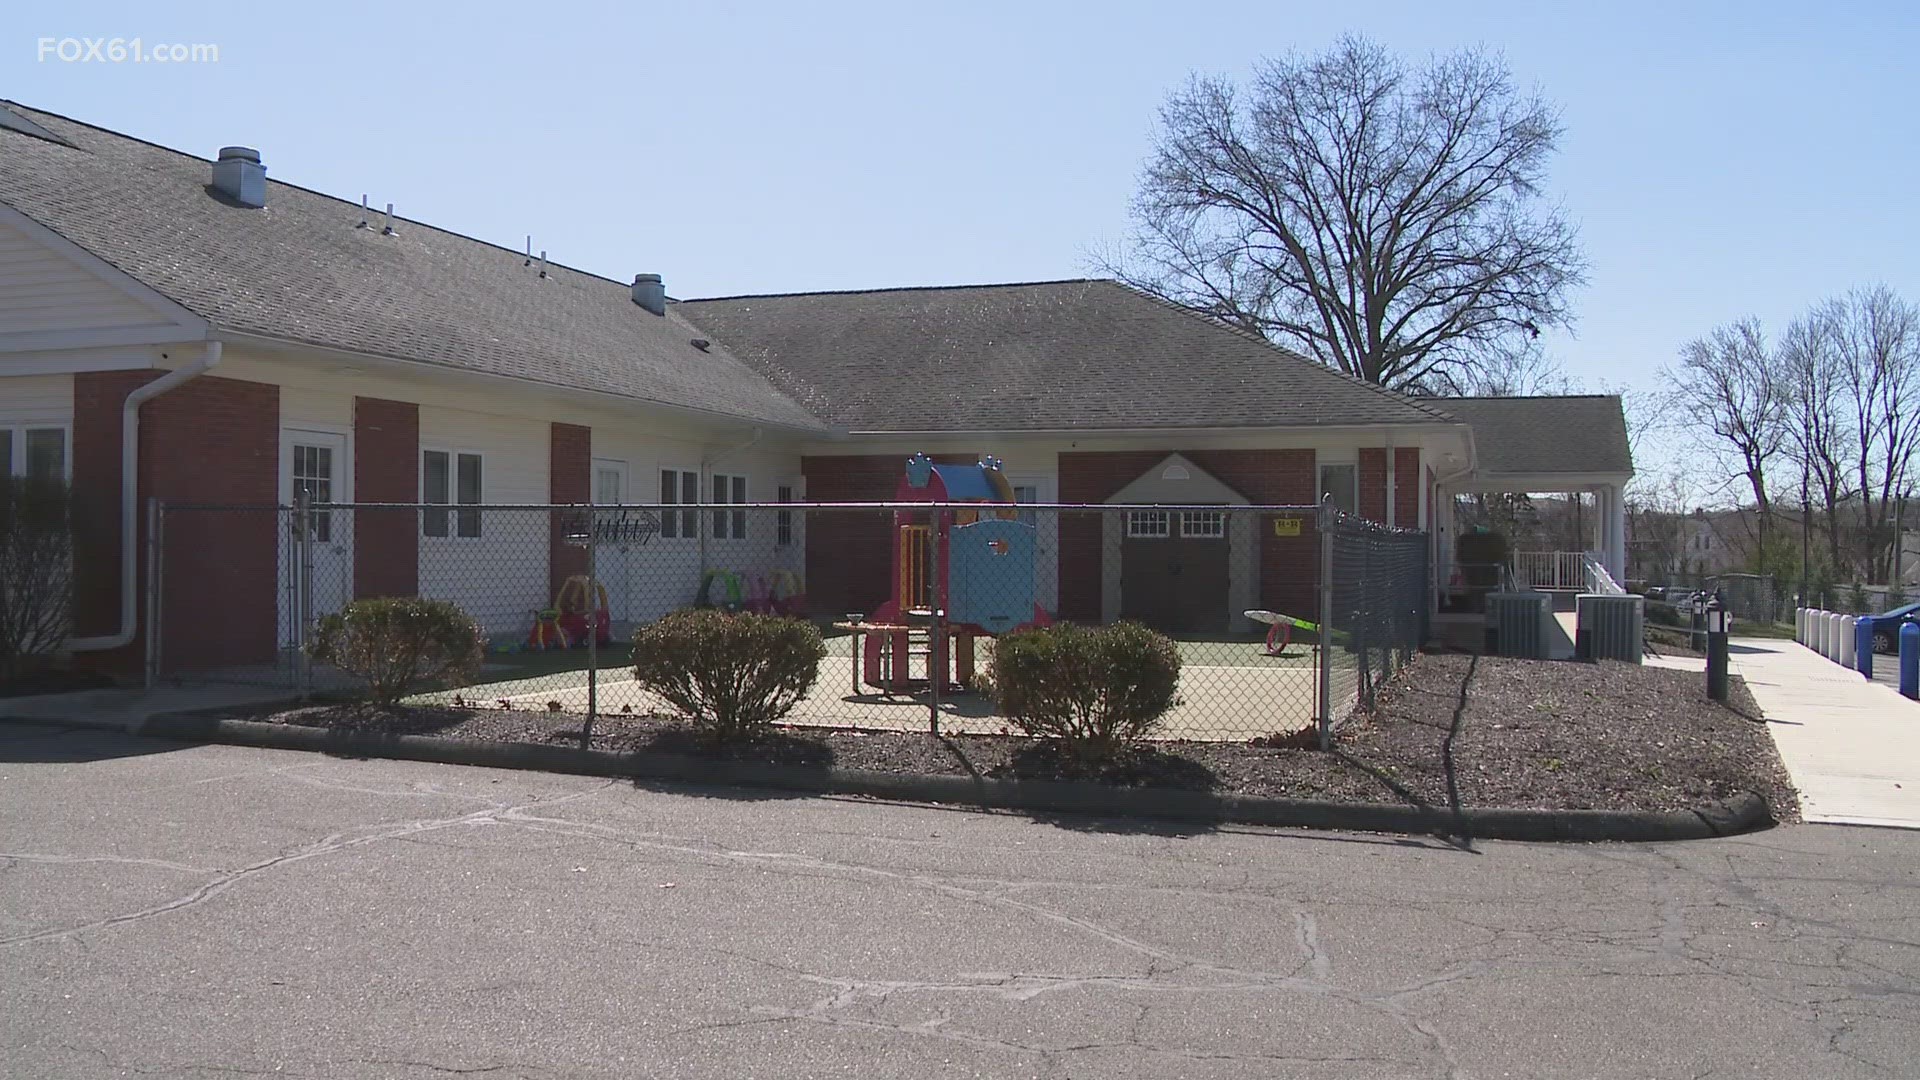 Police have arrested one worker and more arrests are possibly coming as they investigate abuse allegations at a Middletown child care and learning center.